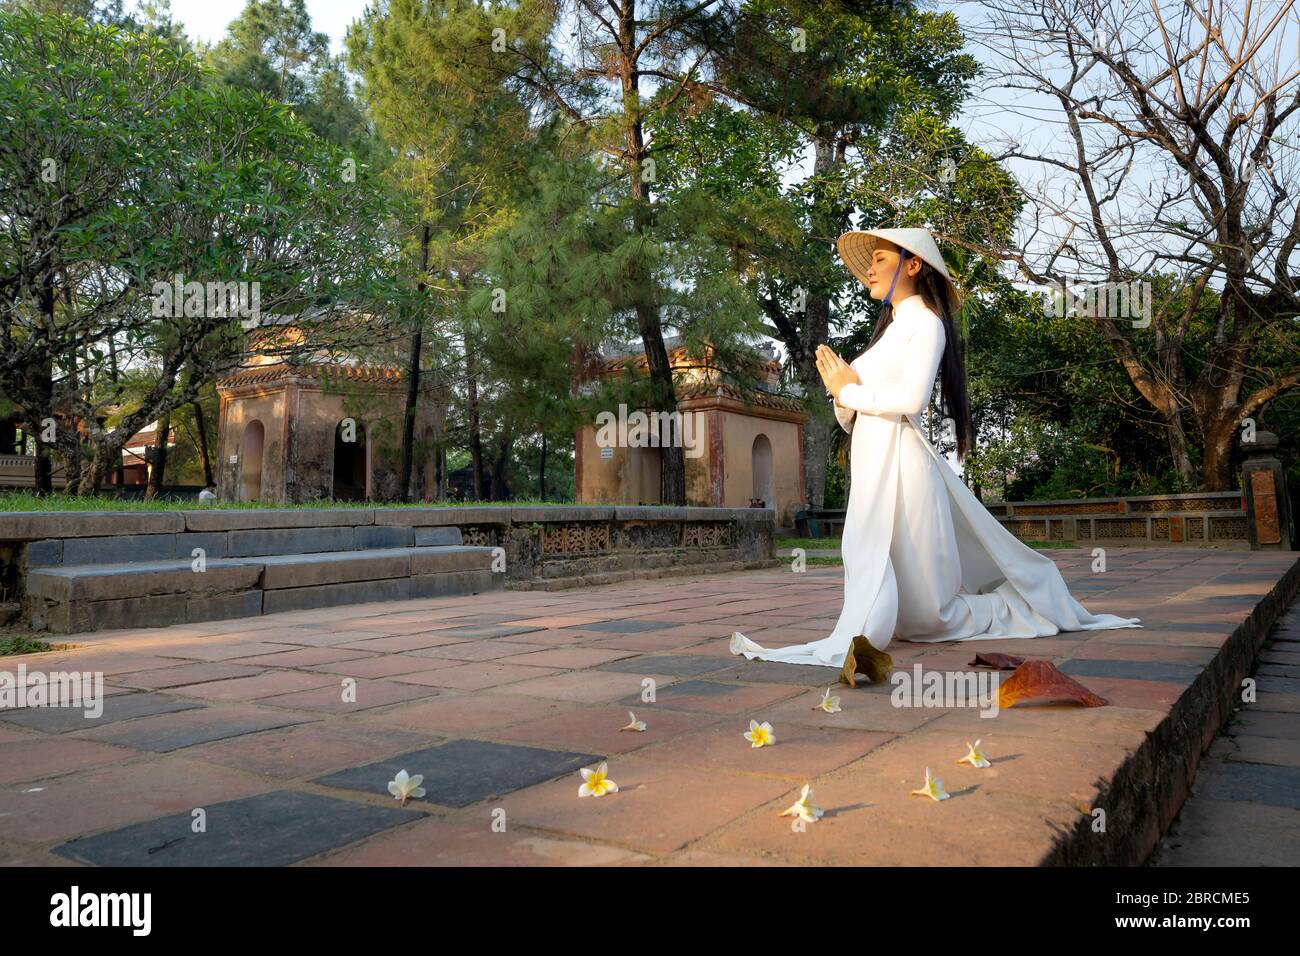 Hue City, Thua Thien Hue Province, Vietnam - May 7, 2020: A scene of a girl in a traditional ao dai costume praying inside a temple Stock Photo